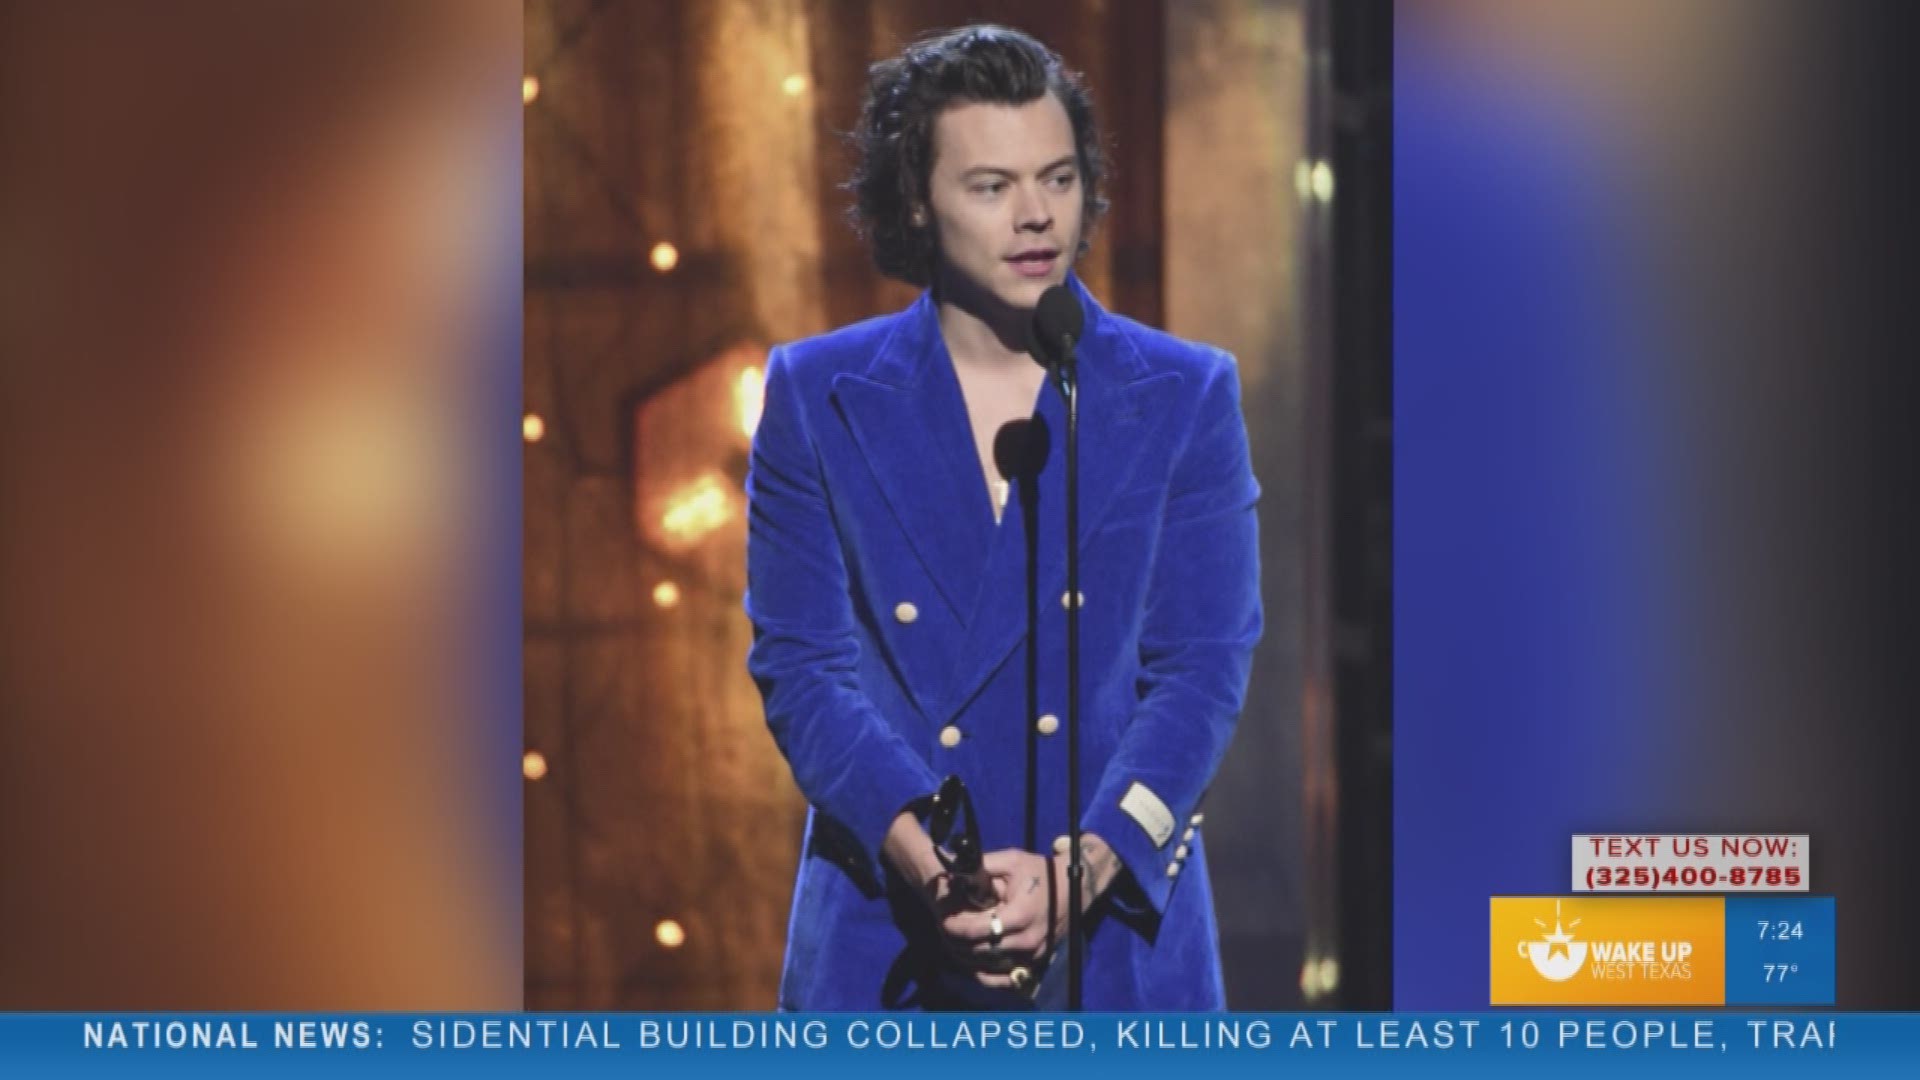 Our Malik Mingo shares what people are saying on social media about the possibility of Harry Styles playing Prince Eric in the upcoming live-action movie, "The Little Mermaid."